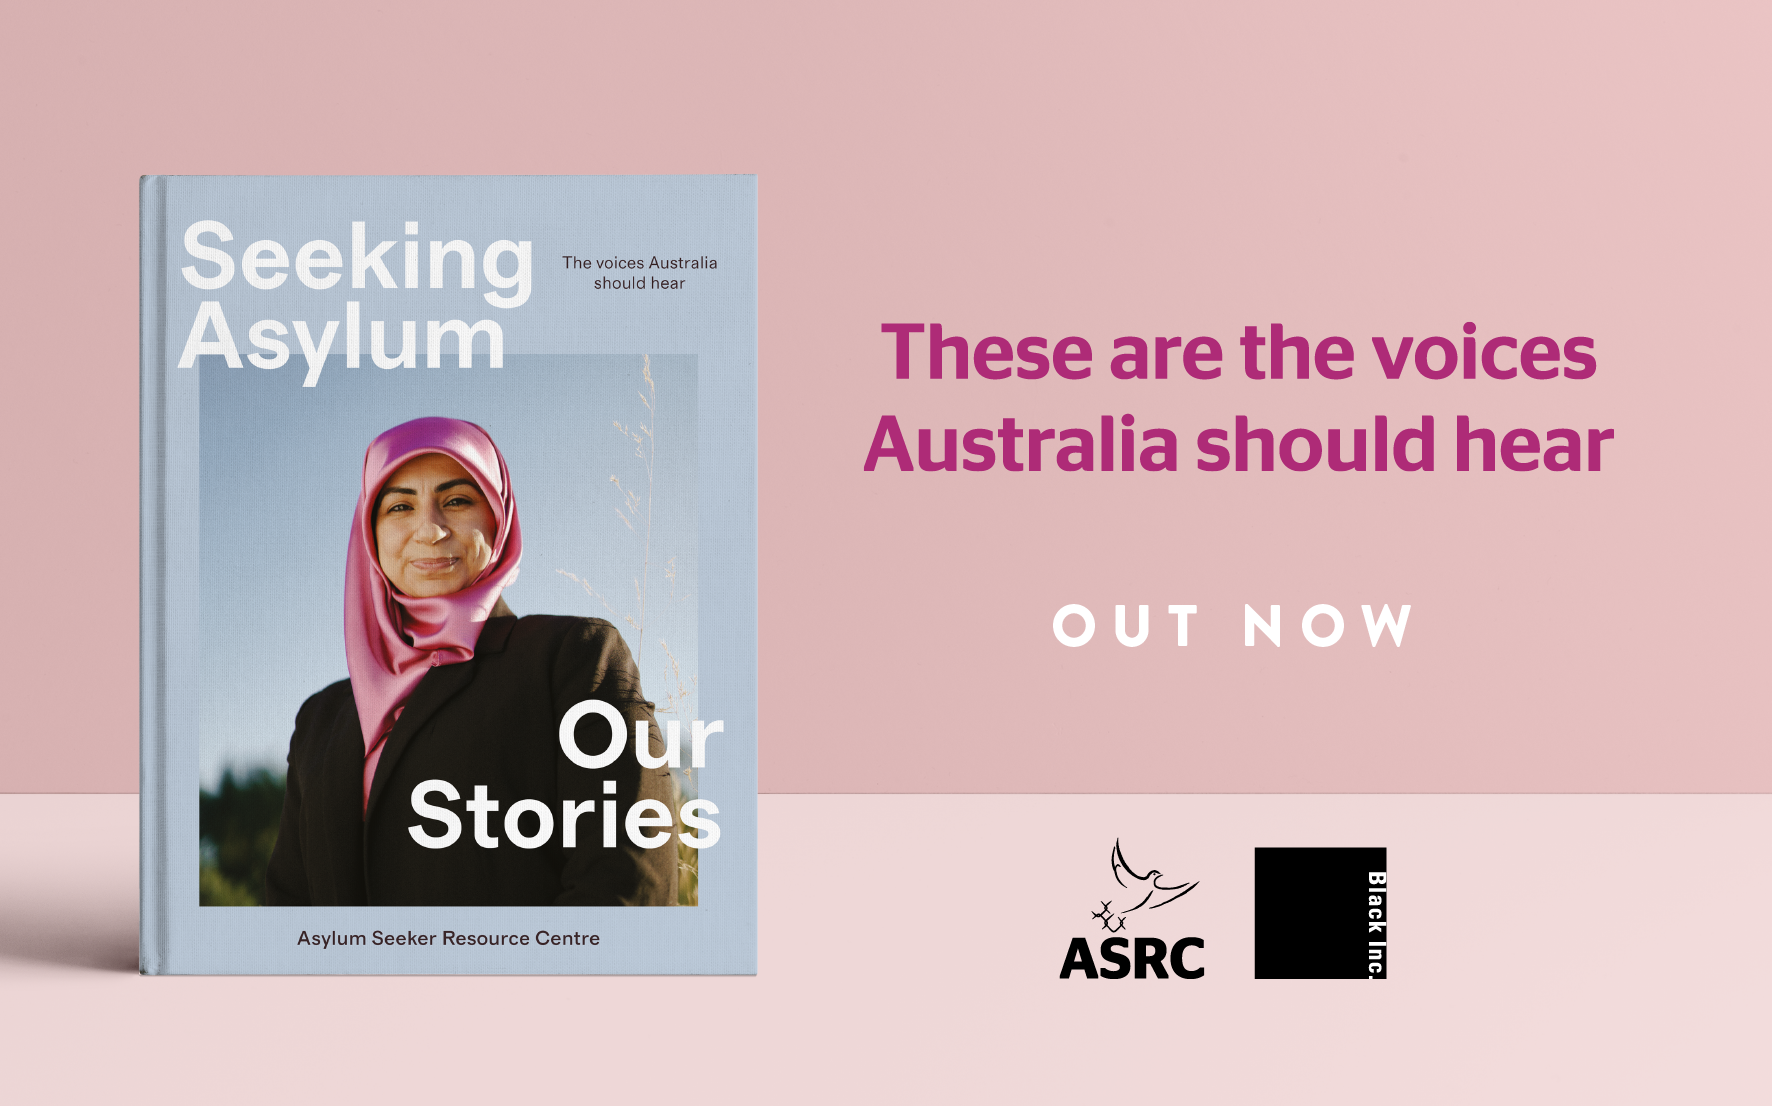 A light pink background features a book cover, the Asylum Seeker Resource Centre logo, and the Black Inc logo. The book cover is light blue, and it features an image of a smiling woman in a magenta hijab and the title of the book ‘Seeking Asylum: Our Stories’ in white text. A magenta circle reads ‘OUT NOW’ to on the left-side of the book. 